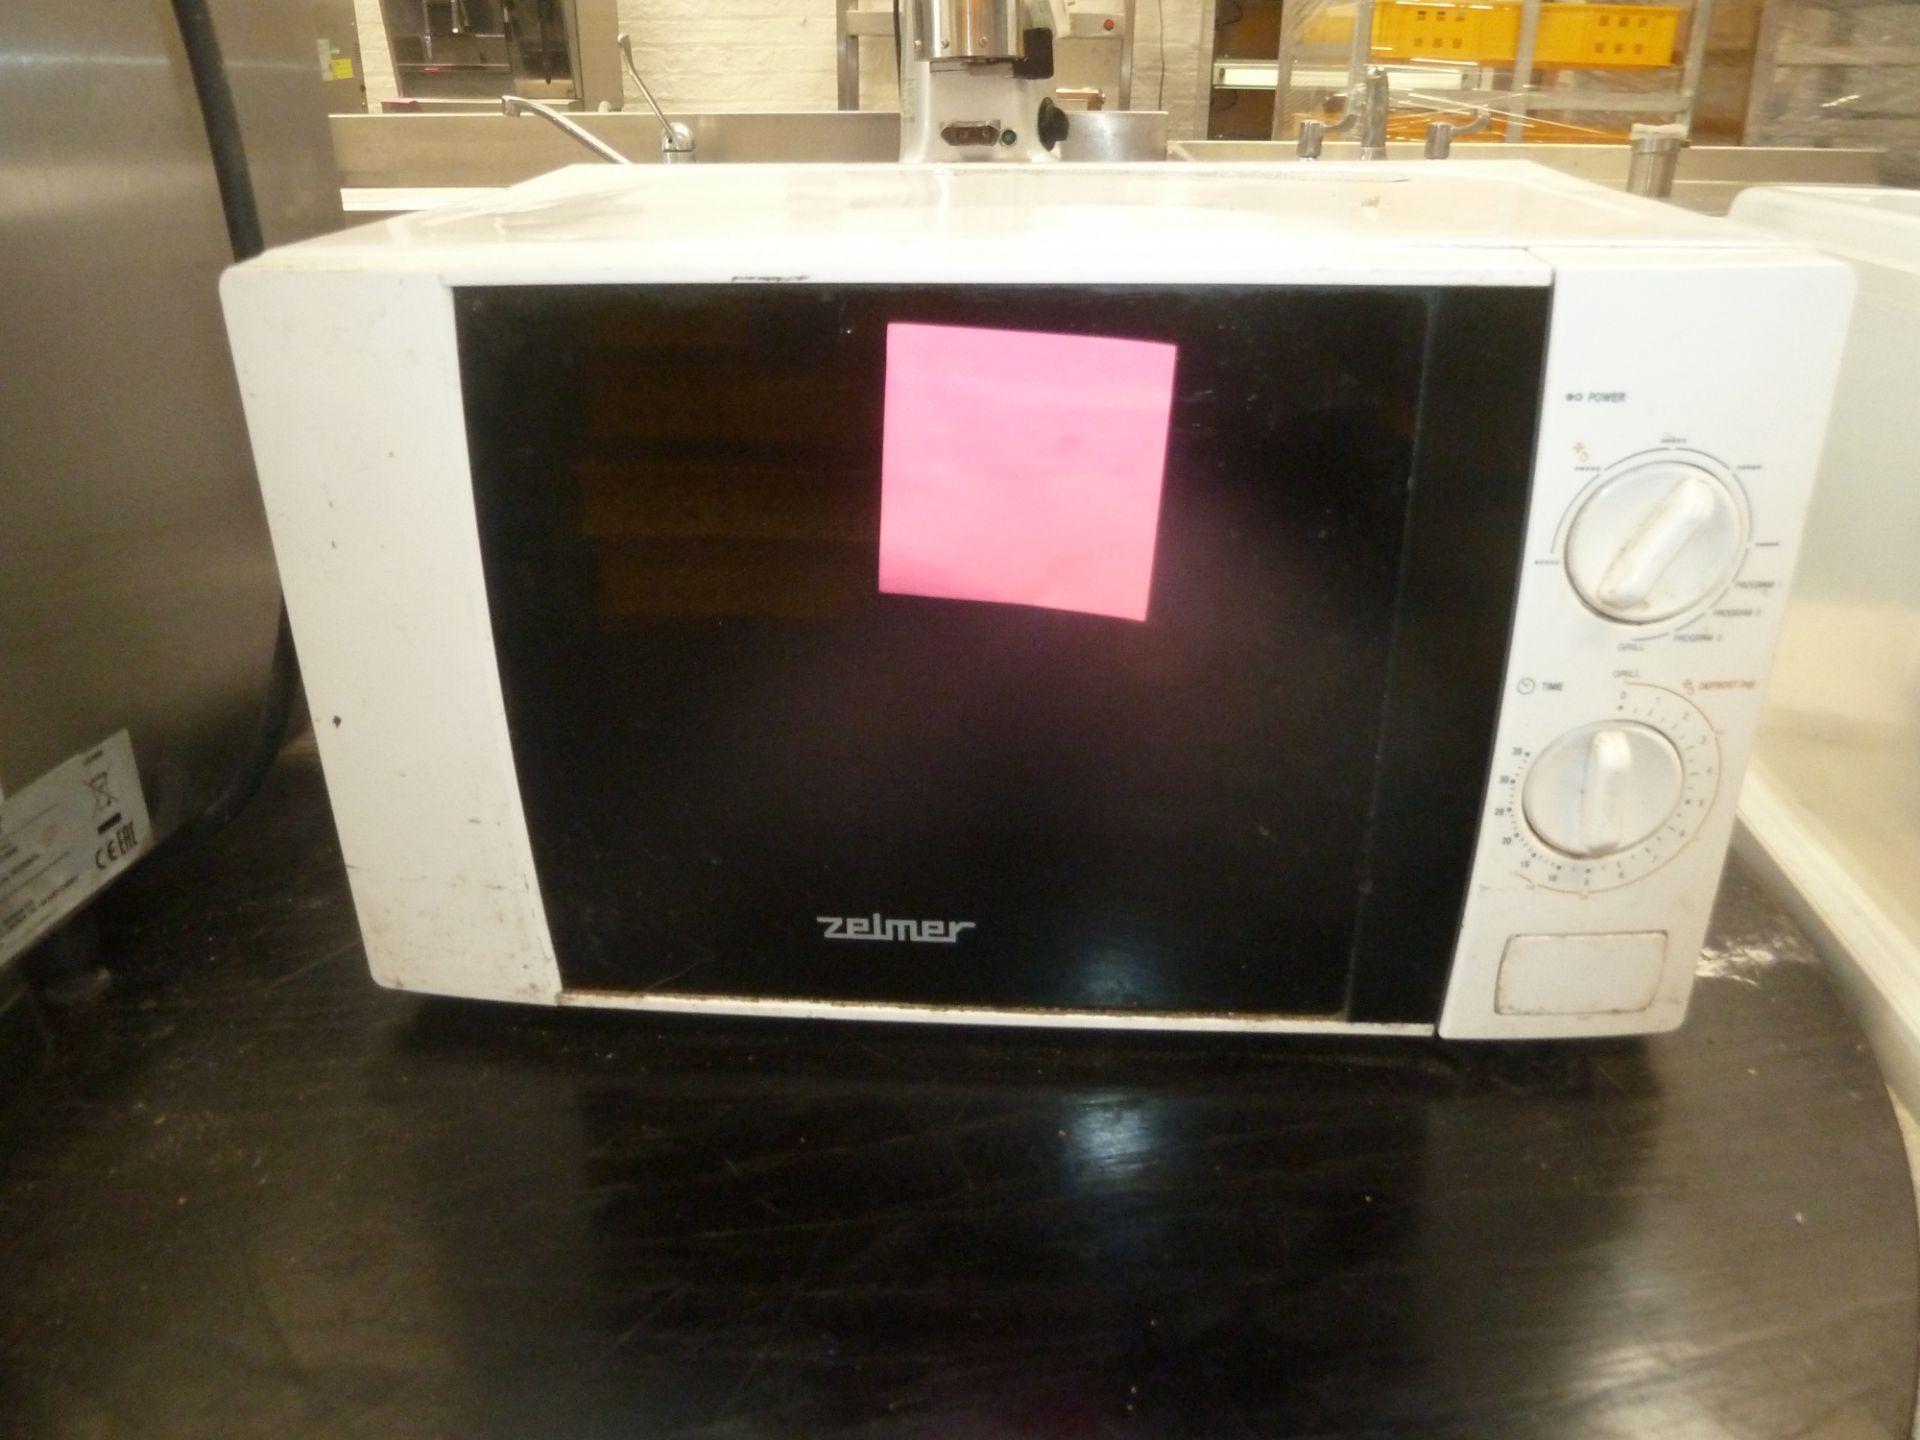 * zelmer microwave used but in good condition.